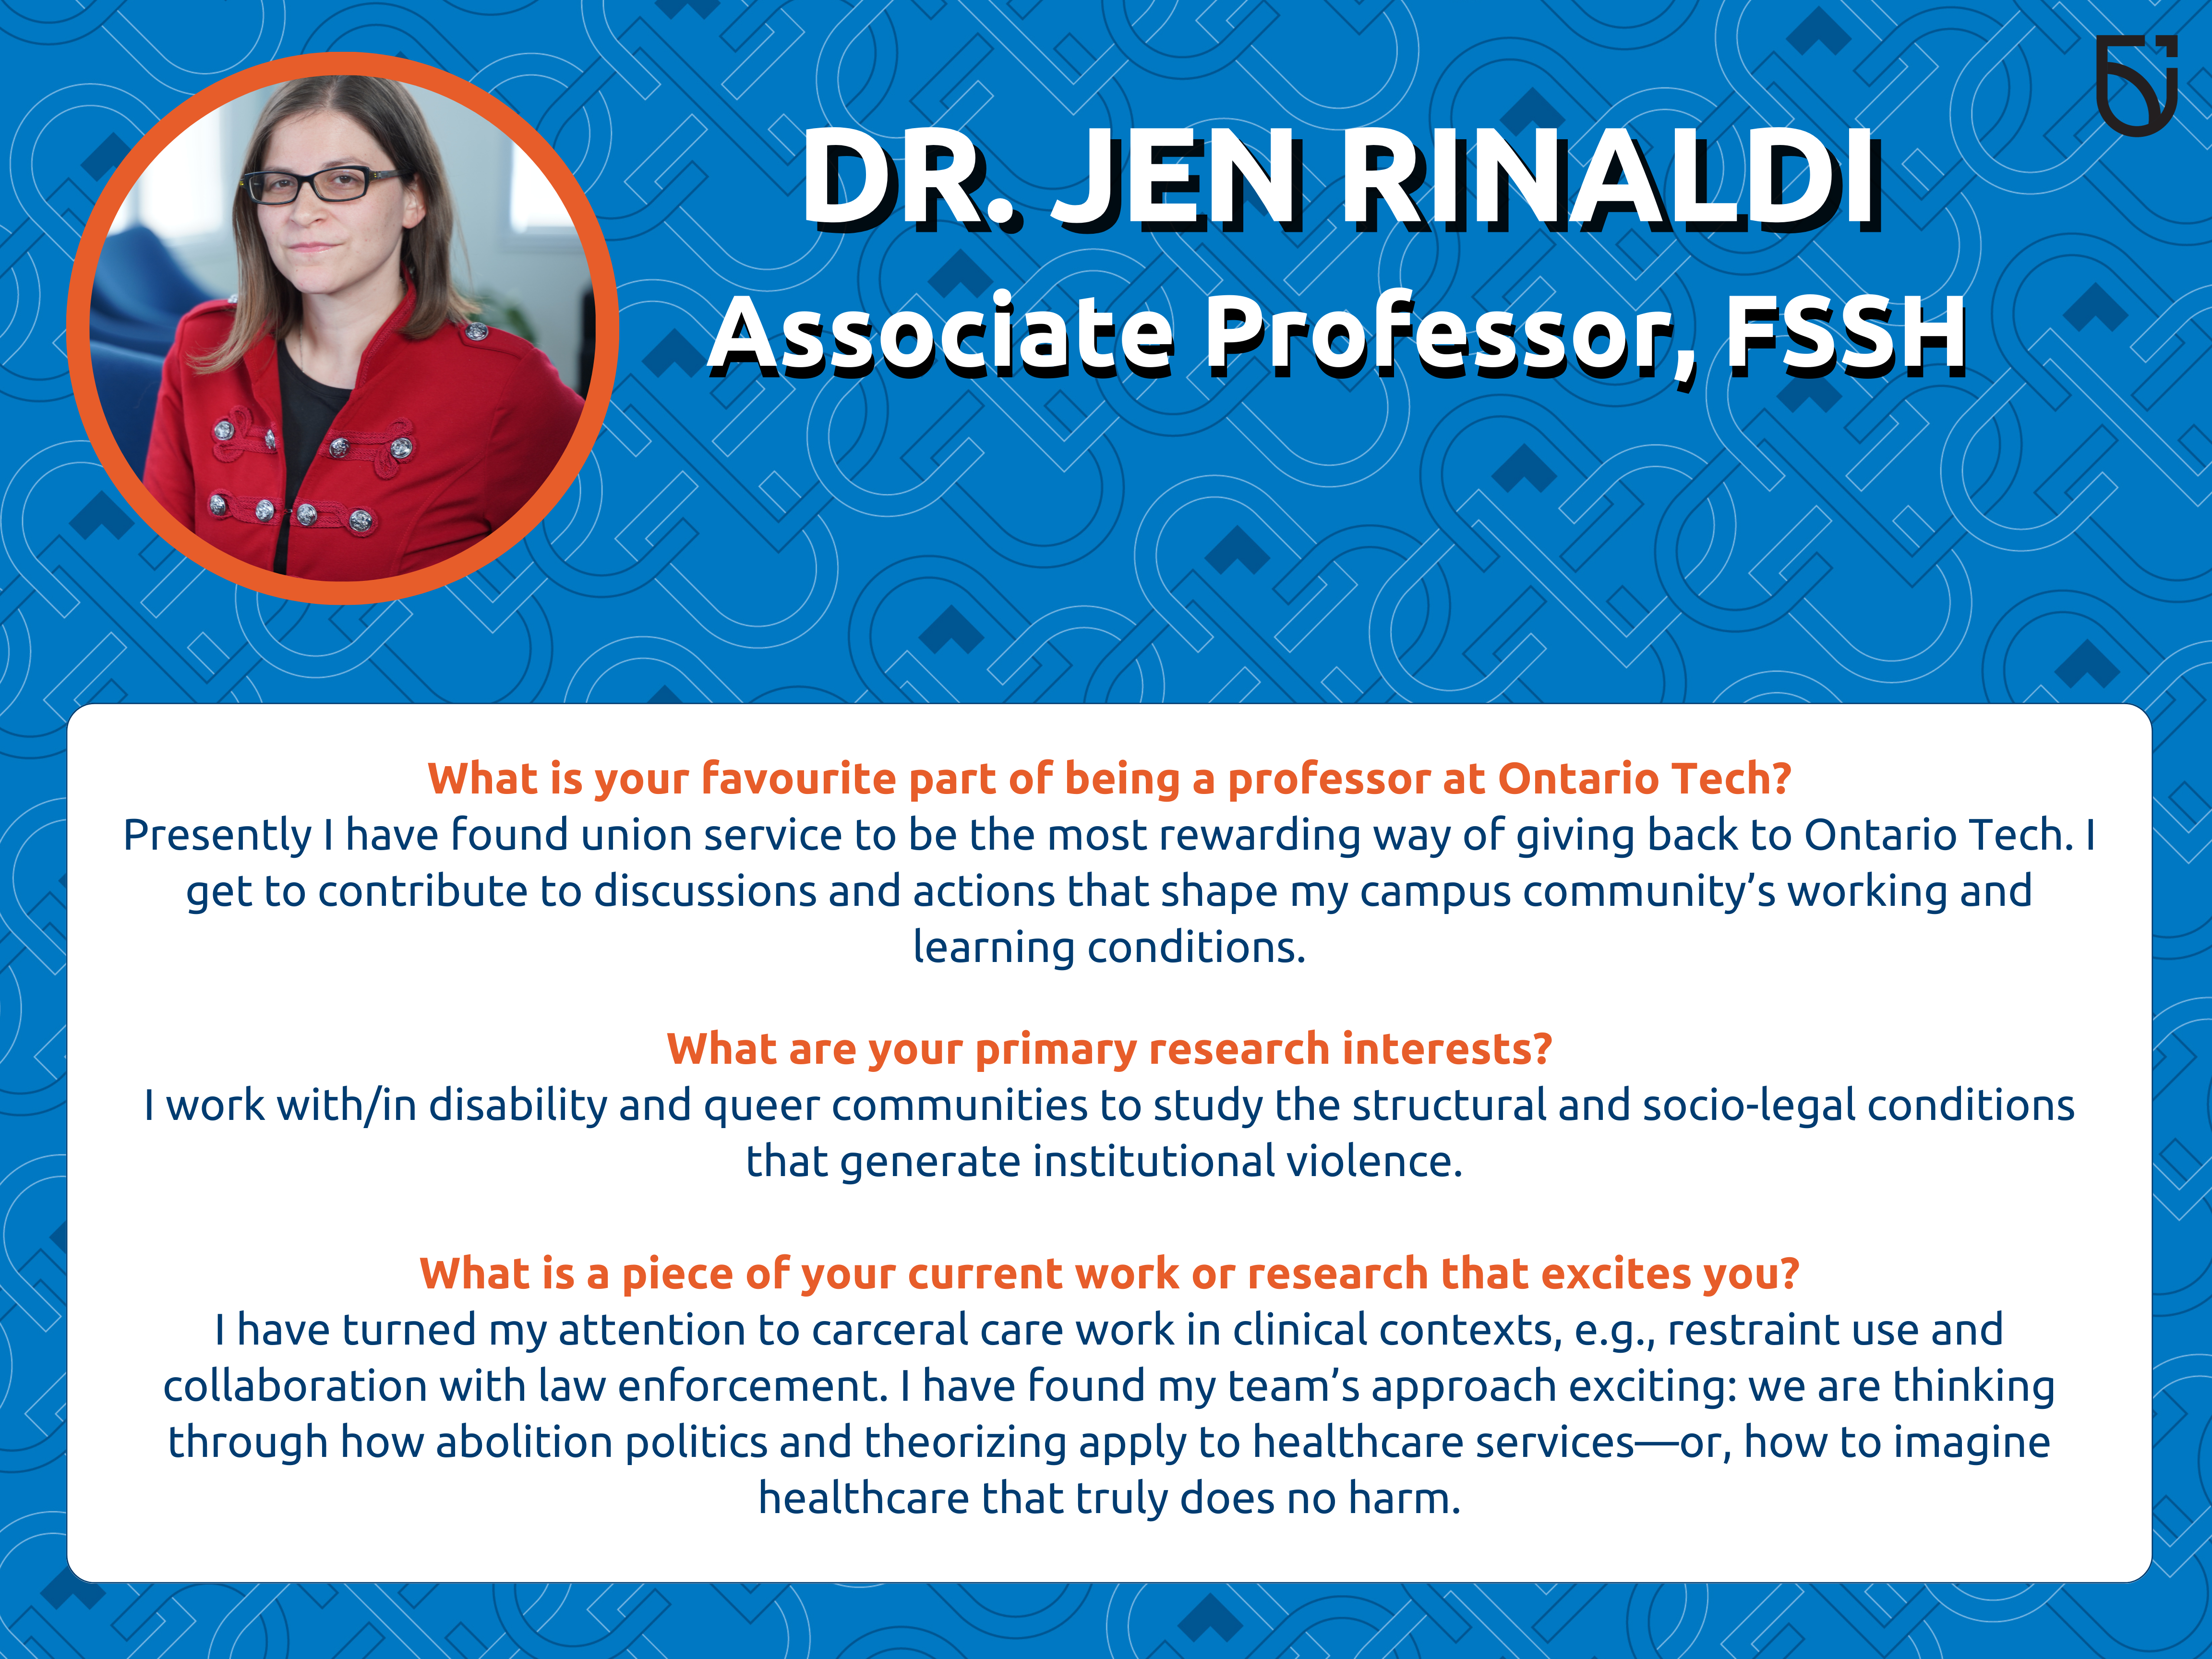 This photo is a Women’s Wednesday feature of Dr. Jen Rinaldi, an Associate Professor in the Faculty of Social Science and Humanities